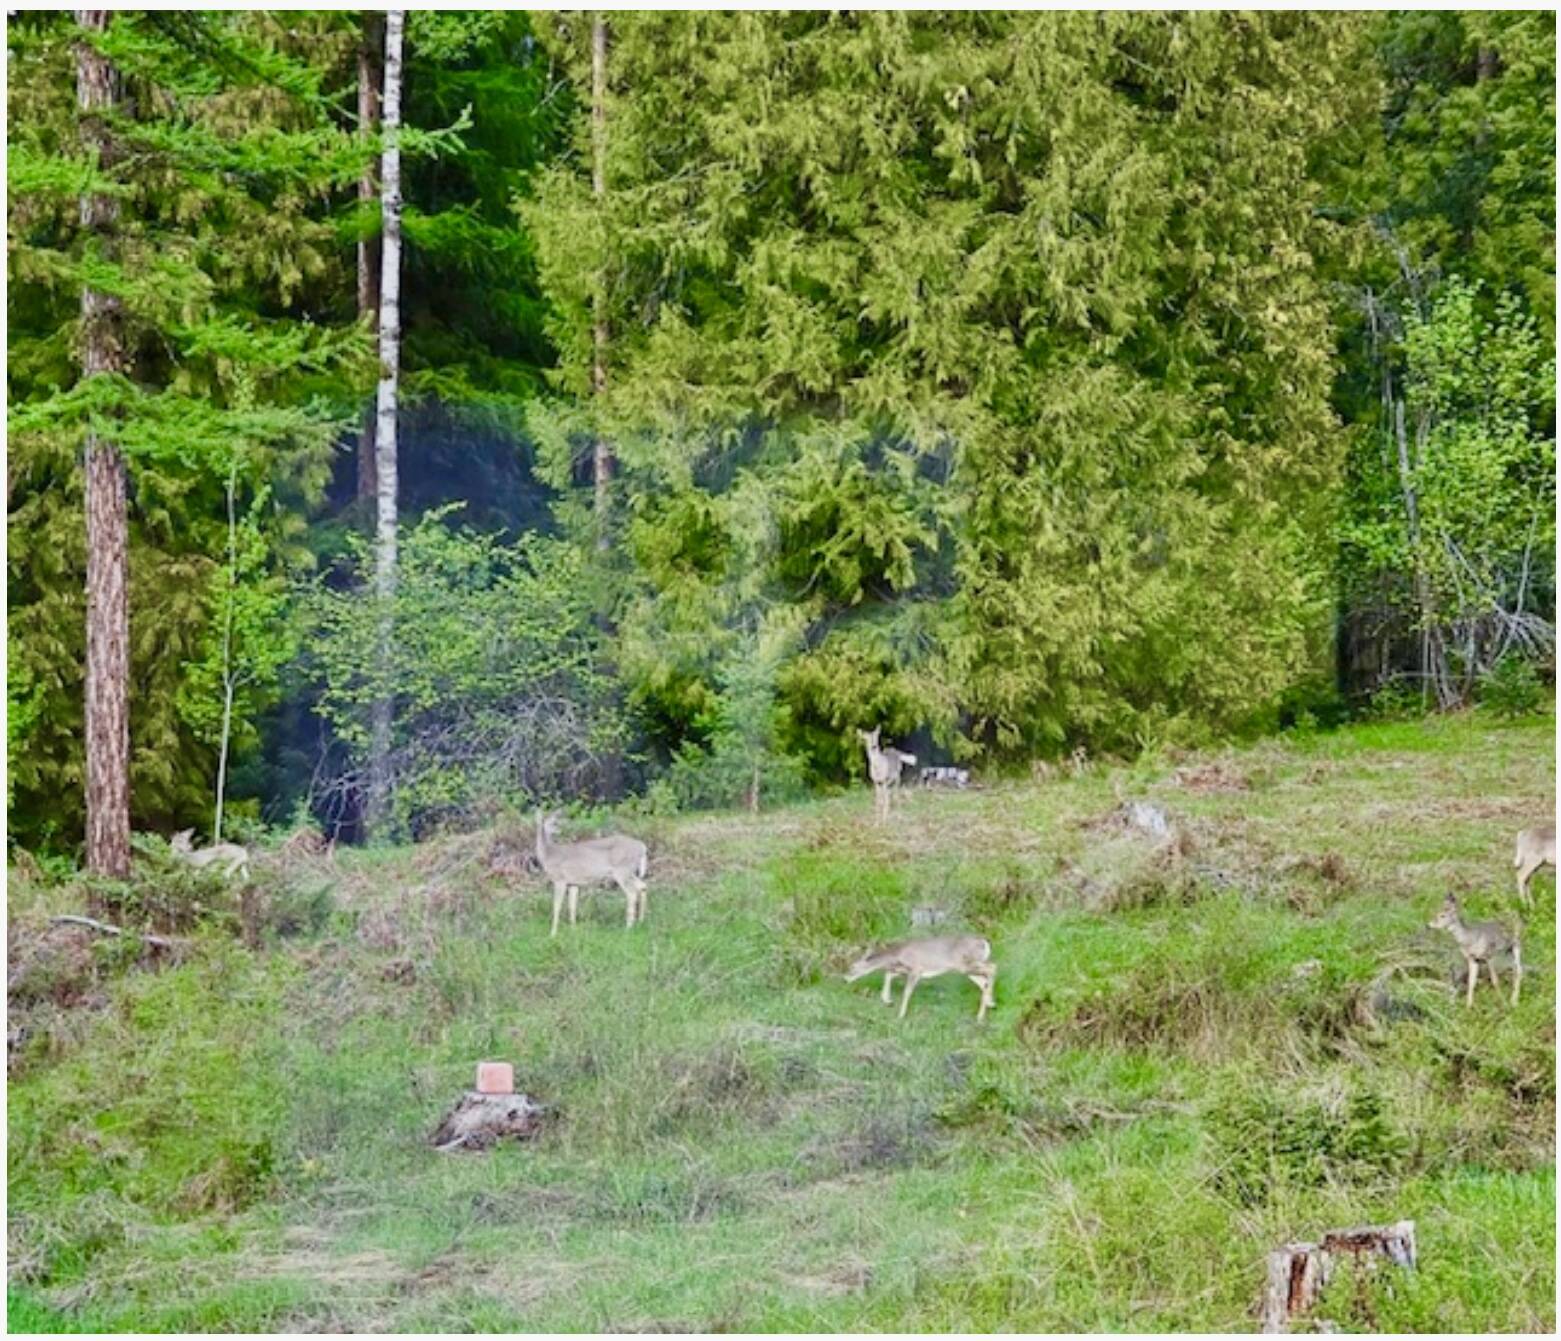 Deer in a field at the Lifely farm. Photo: Submitted